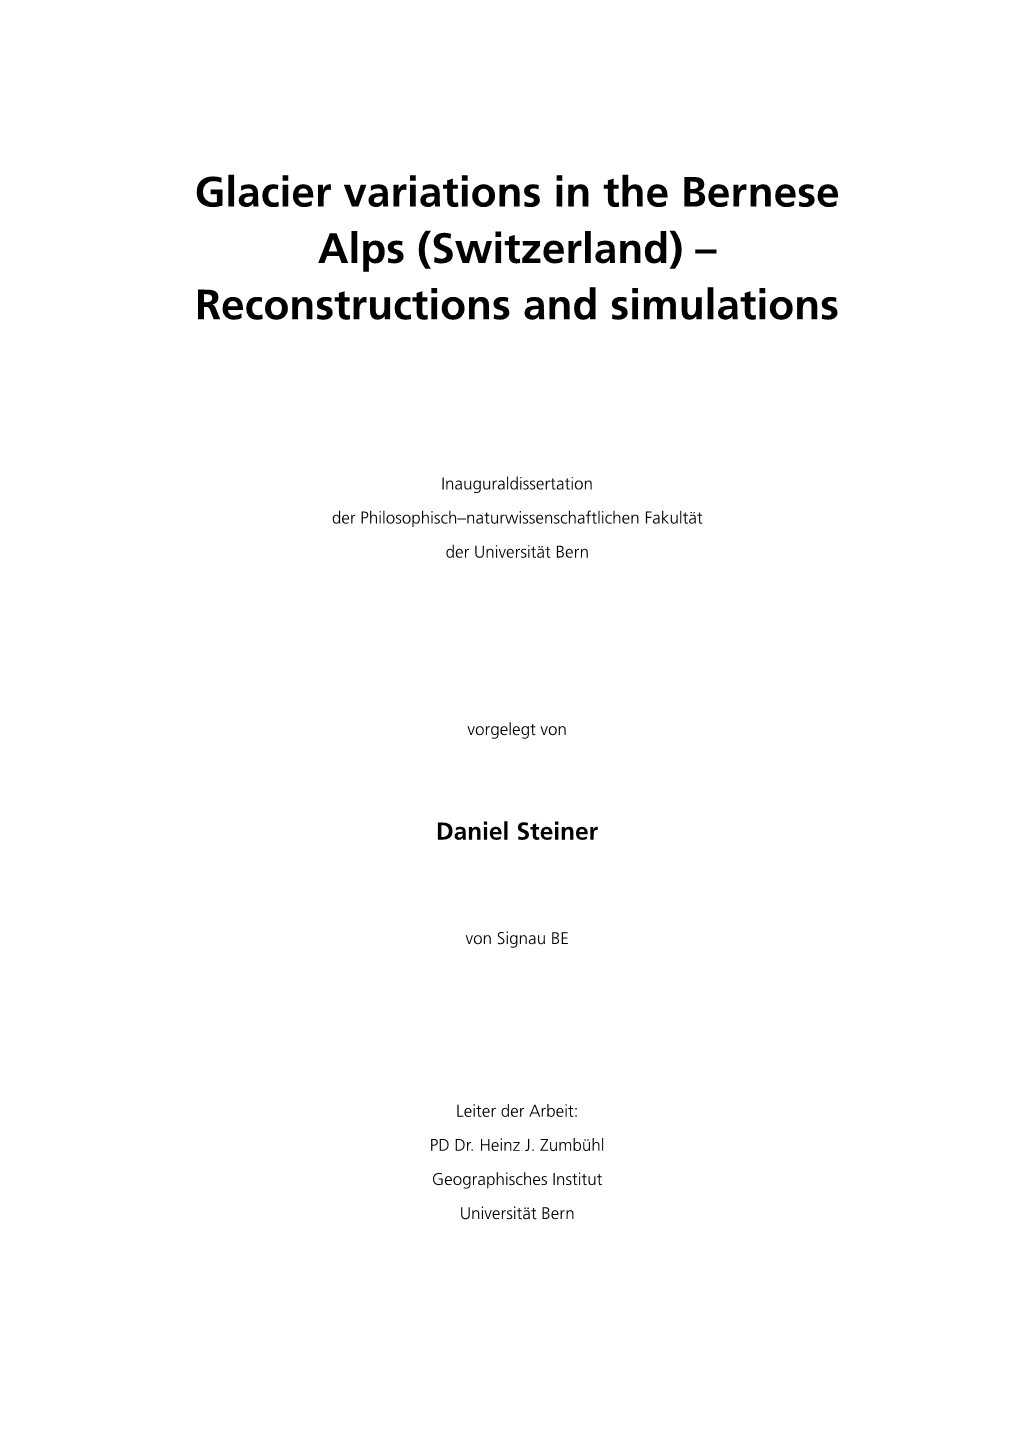 Glacier Variations in the Bernese Alps (Switzerland) – Reconstructions and Simulations